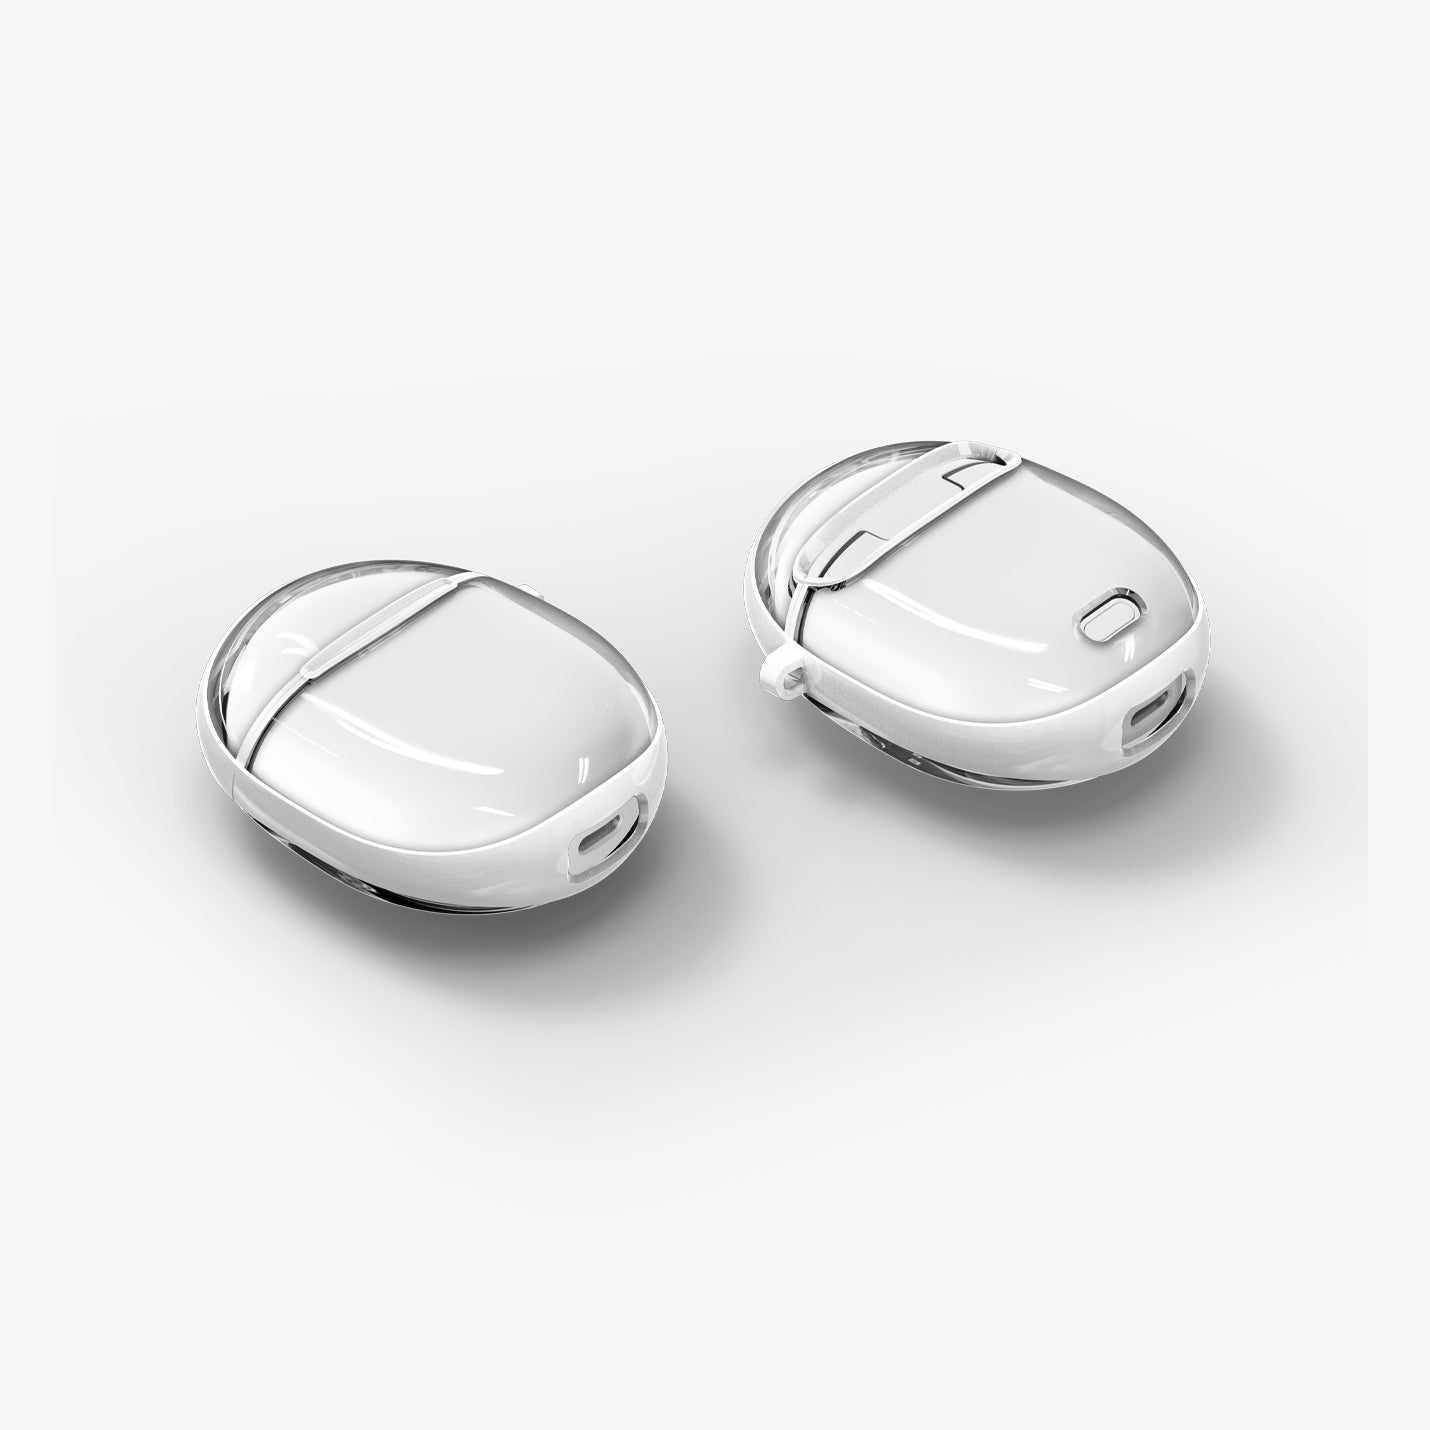 ACS05134 - Pixel Buds Pro Case Ultra Hybrid in jet white showing the front, back, side and bottom